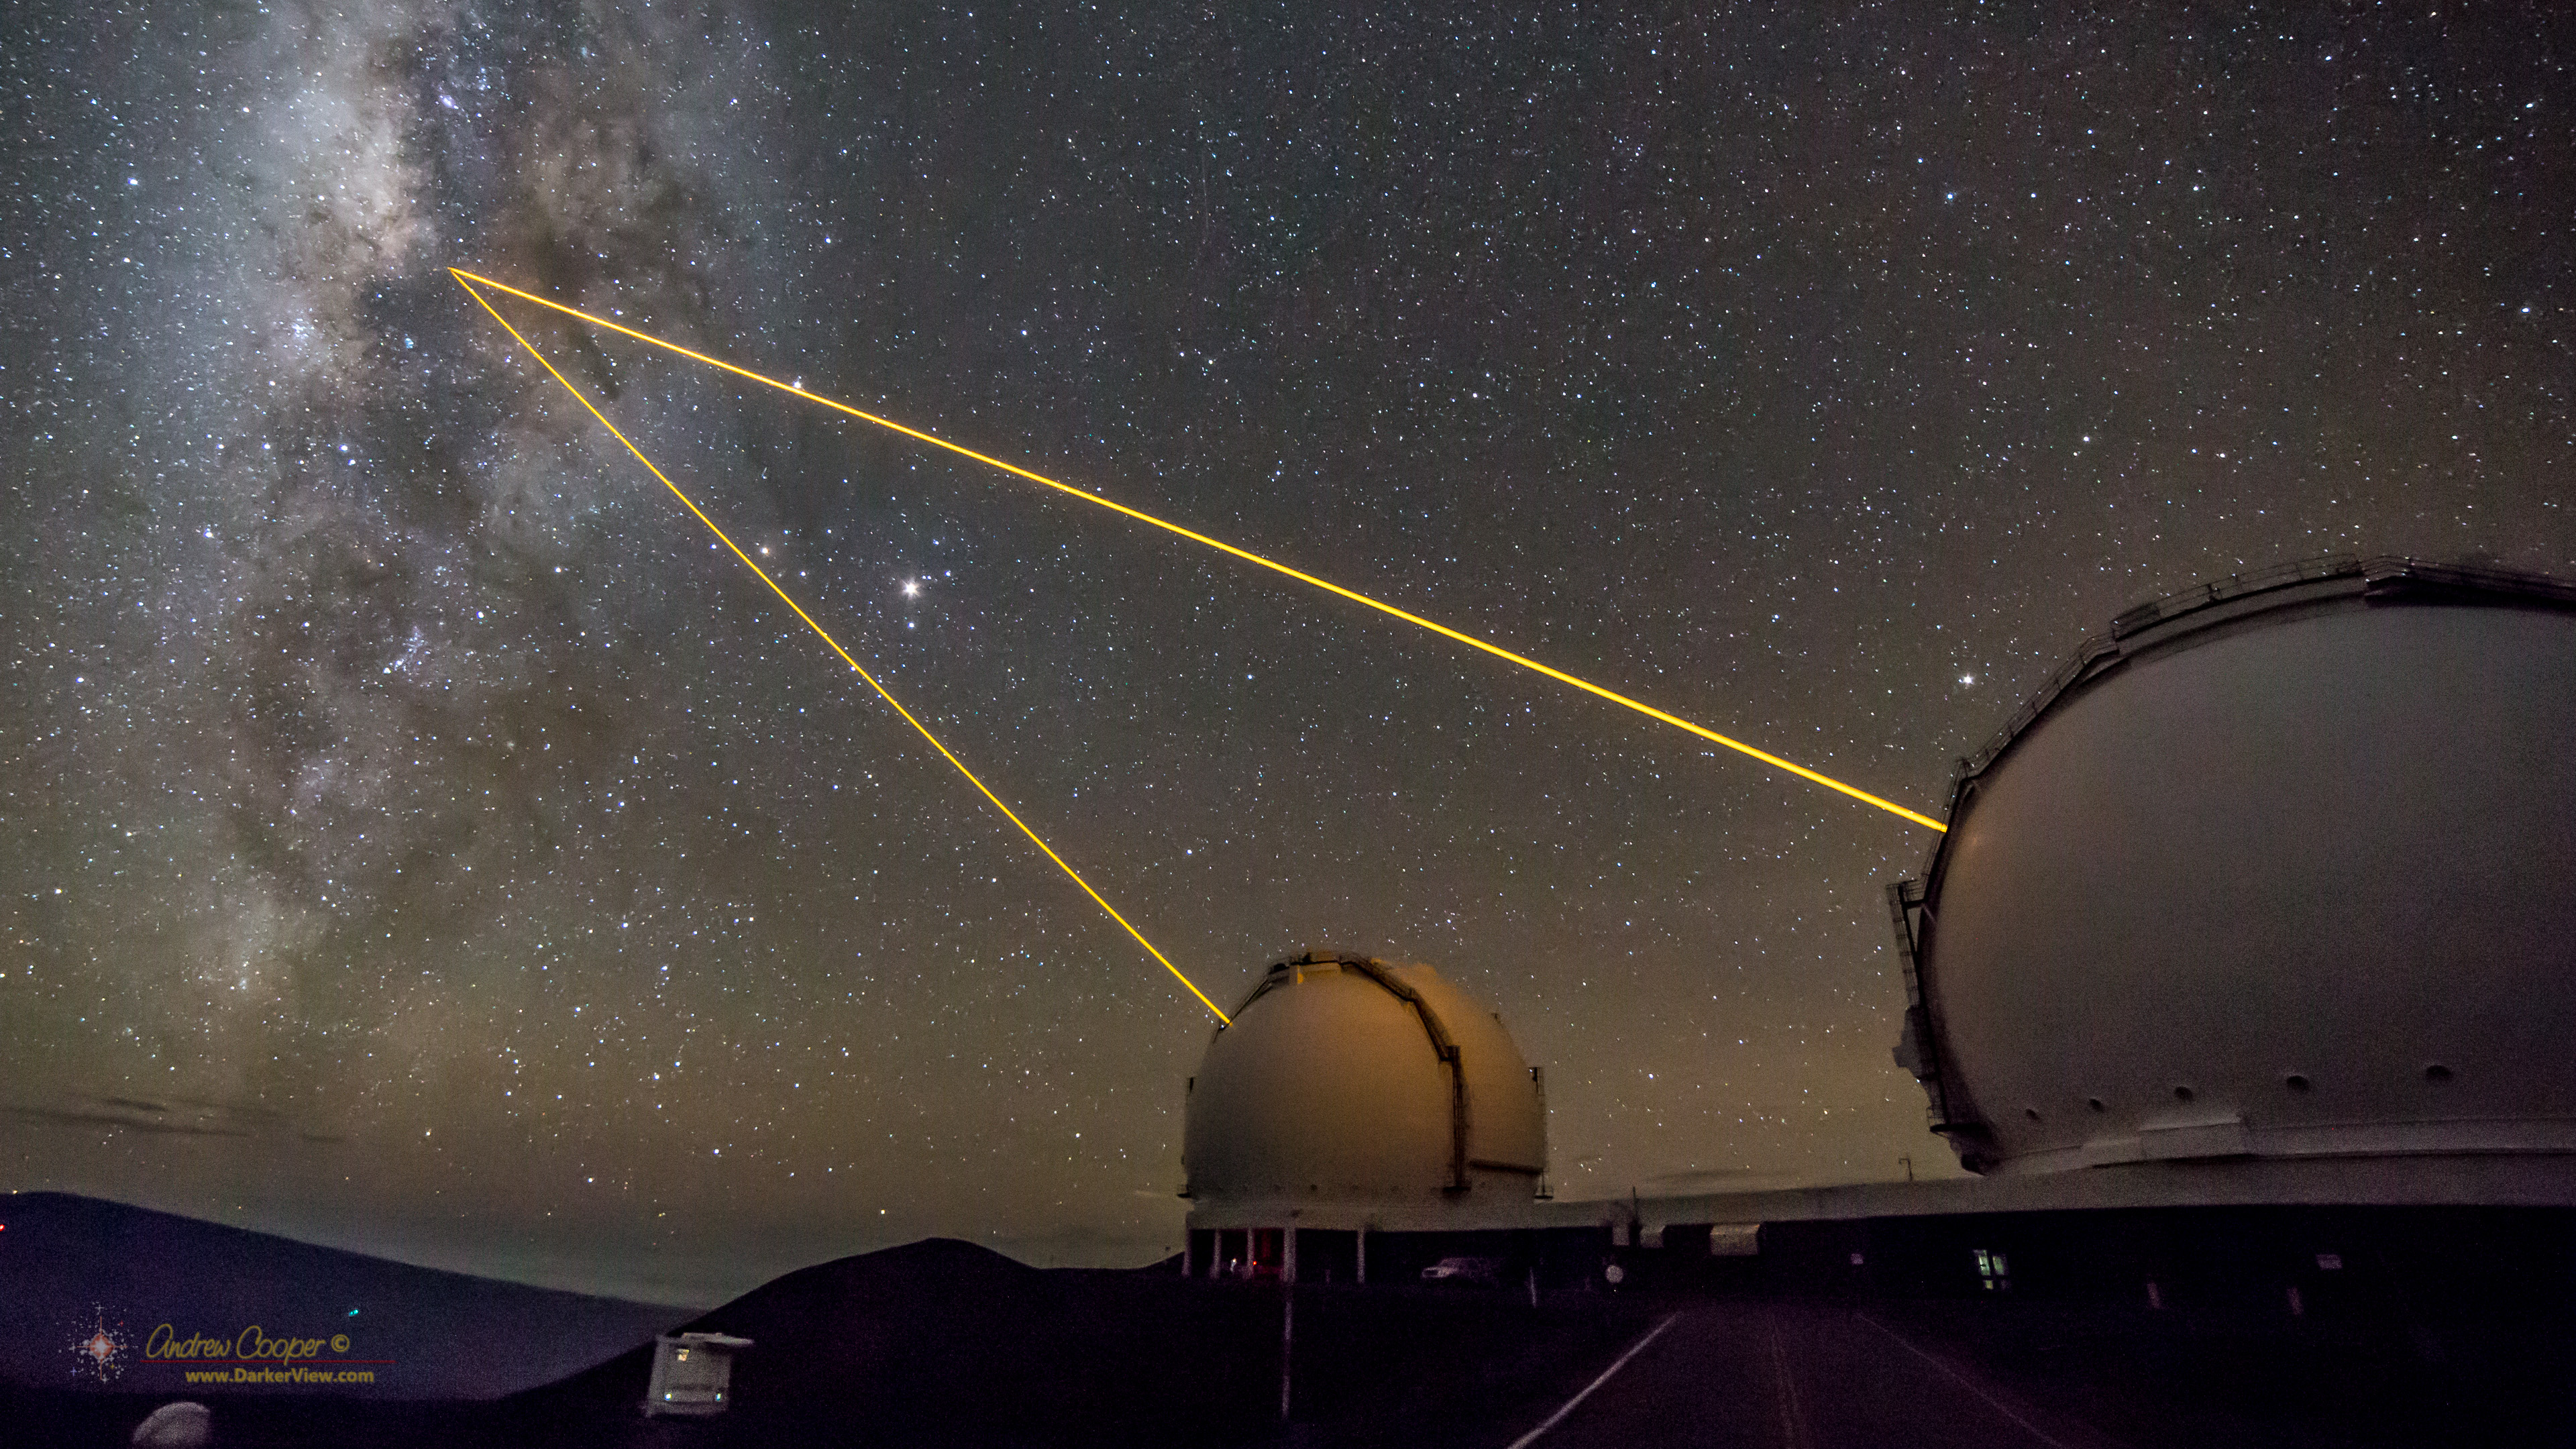 A pair of AO lasers used to observe the central region of the Milky Way Galaxy emerge from Keck 1 and Keck 2